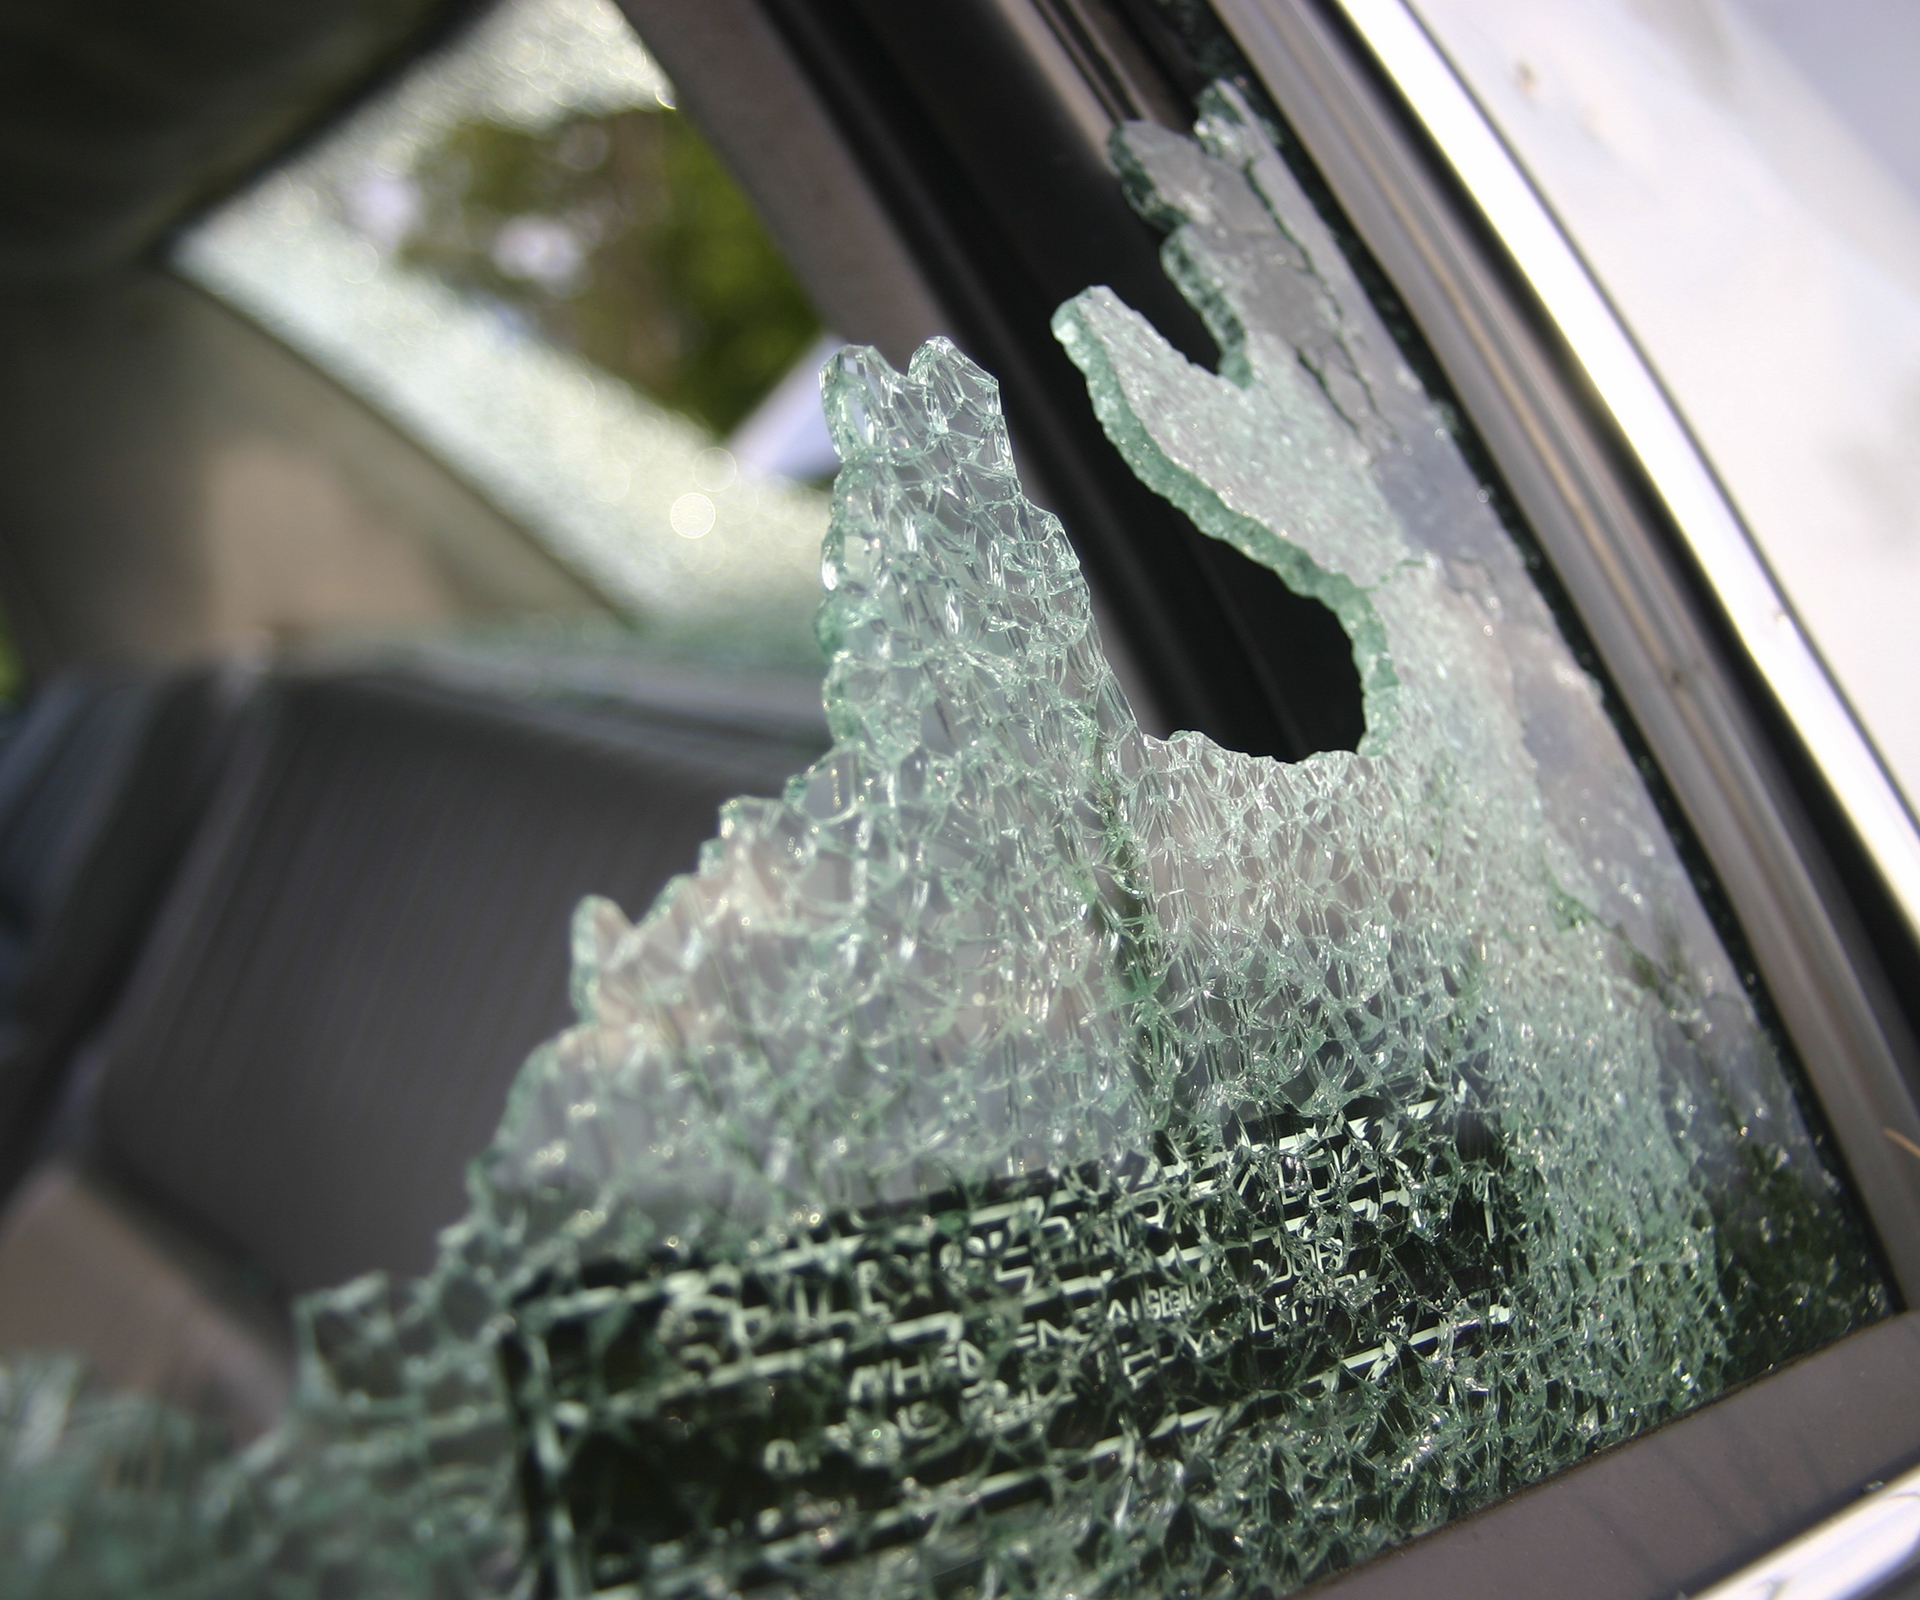 Stranger smashes window to rescue toddler locked car in sweltering heat